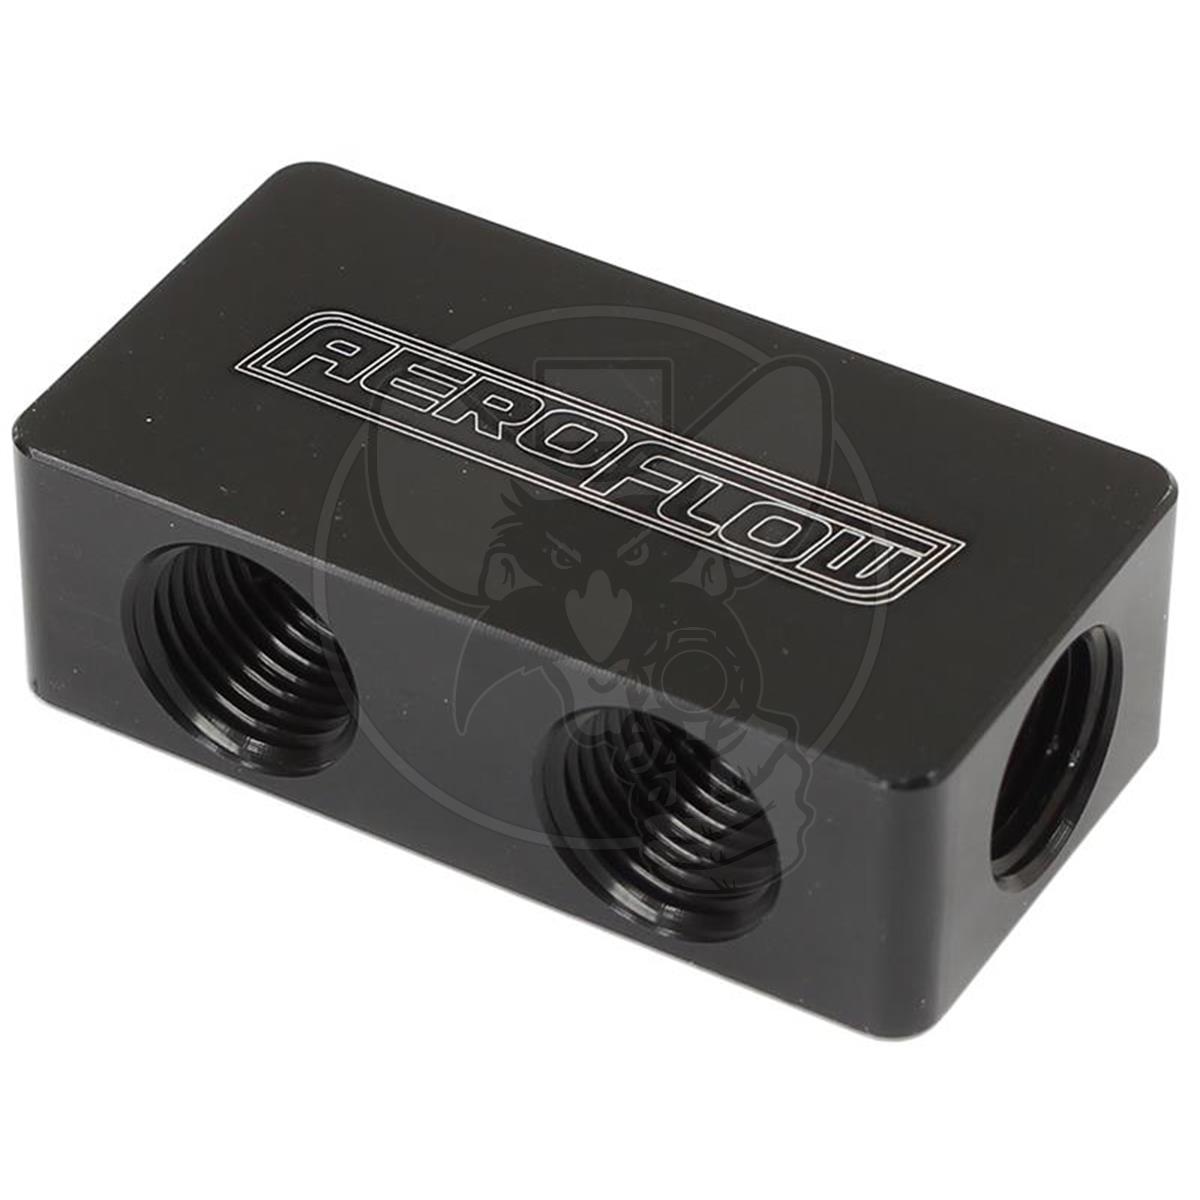 AEROFLOW DISTRIBUTION BLOCK 2 IN 4 OUT - ALL PORTS 1/8" NPT BLK